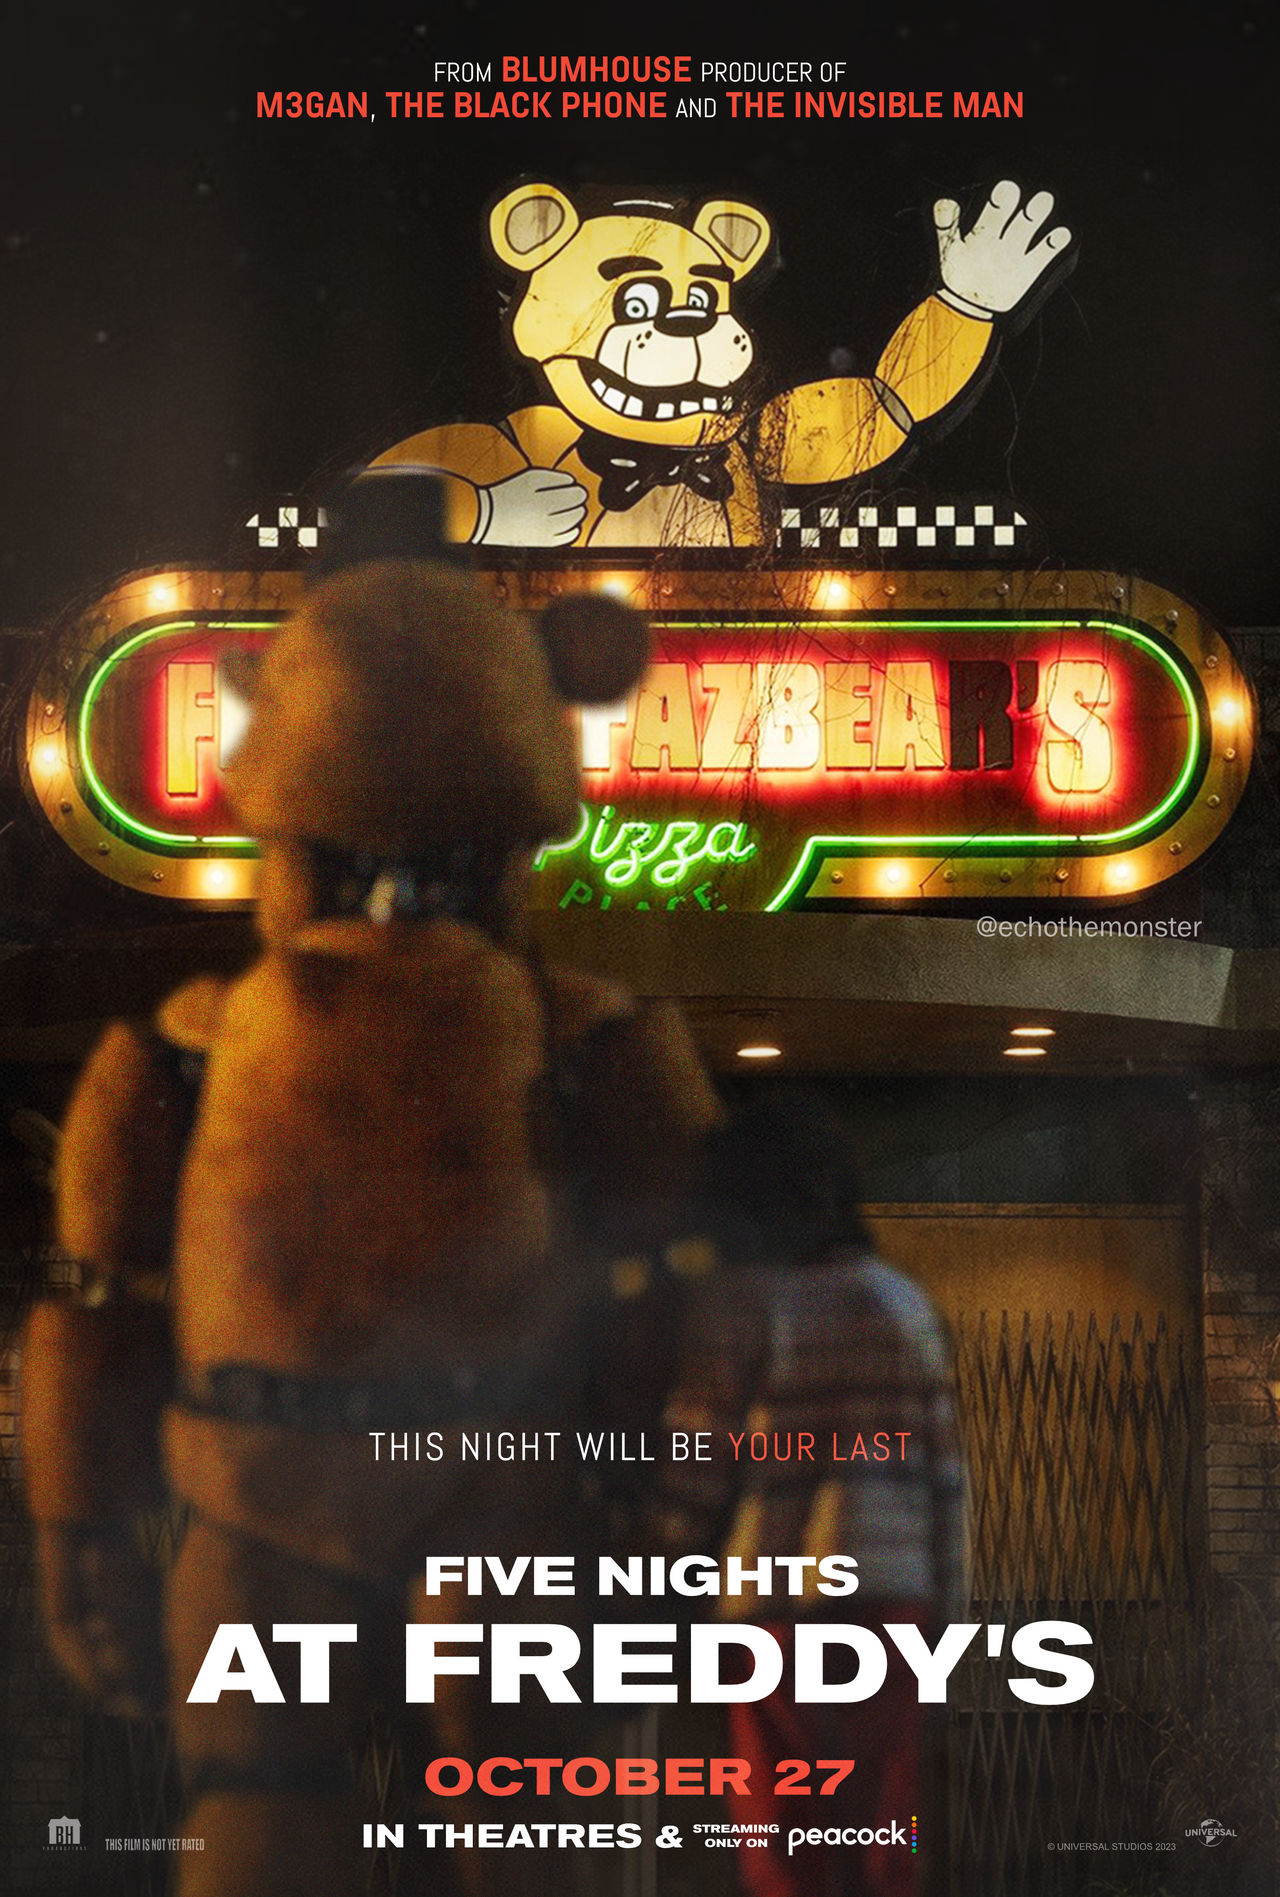 Five Nights At Freddy's Security Breach Poster by SirBlueStudios